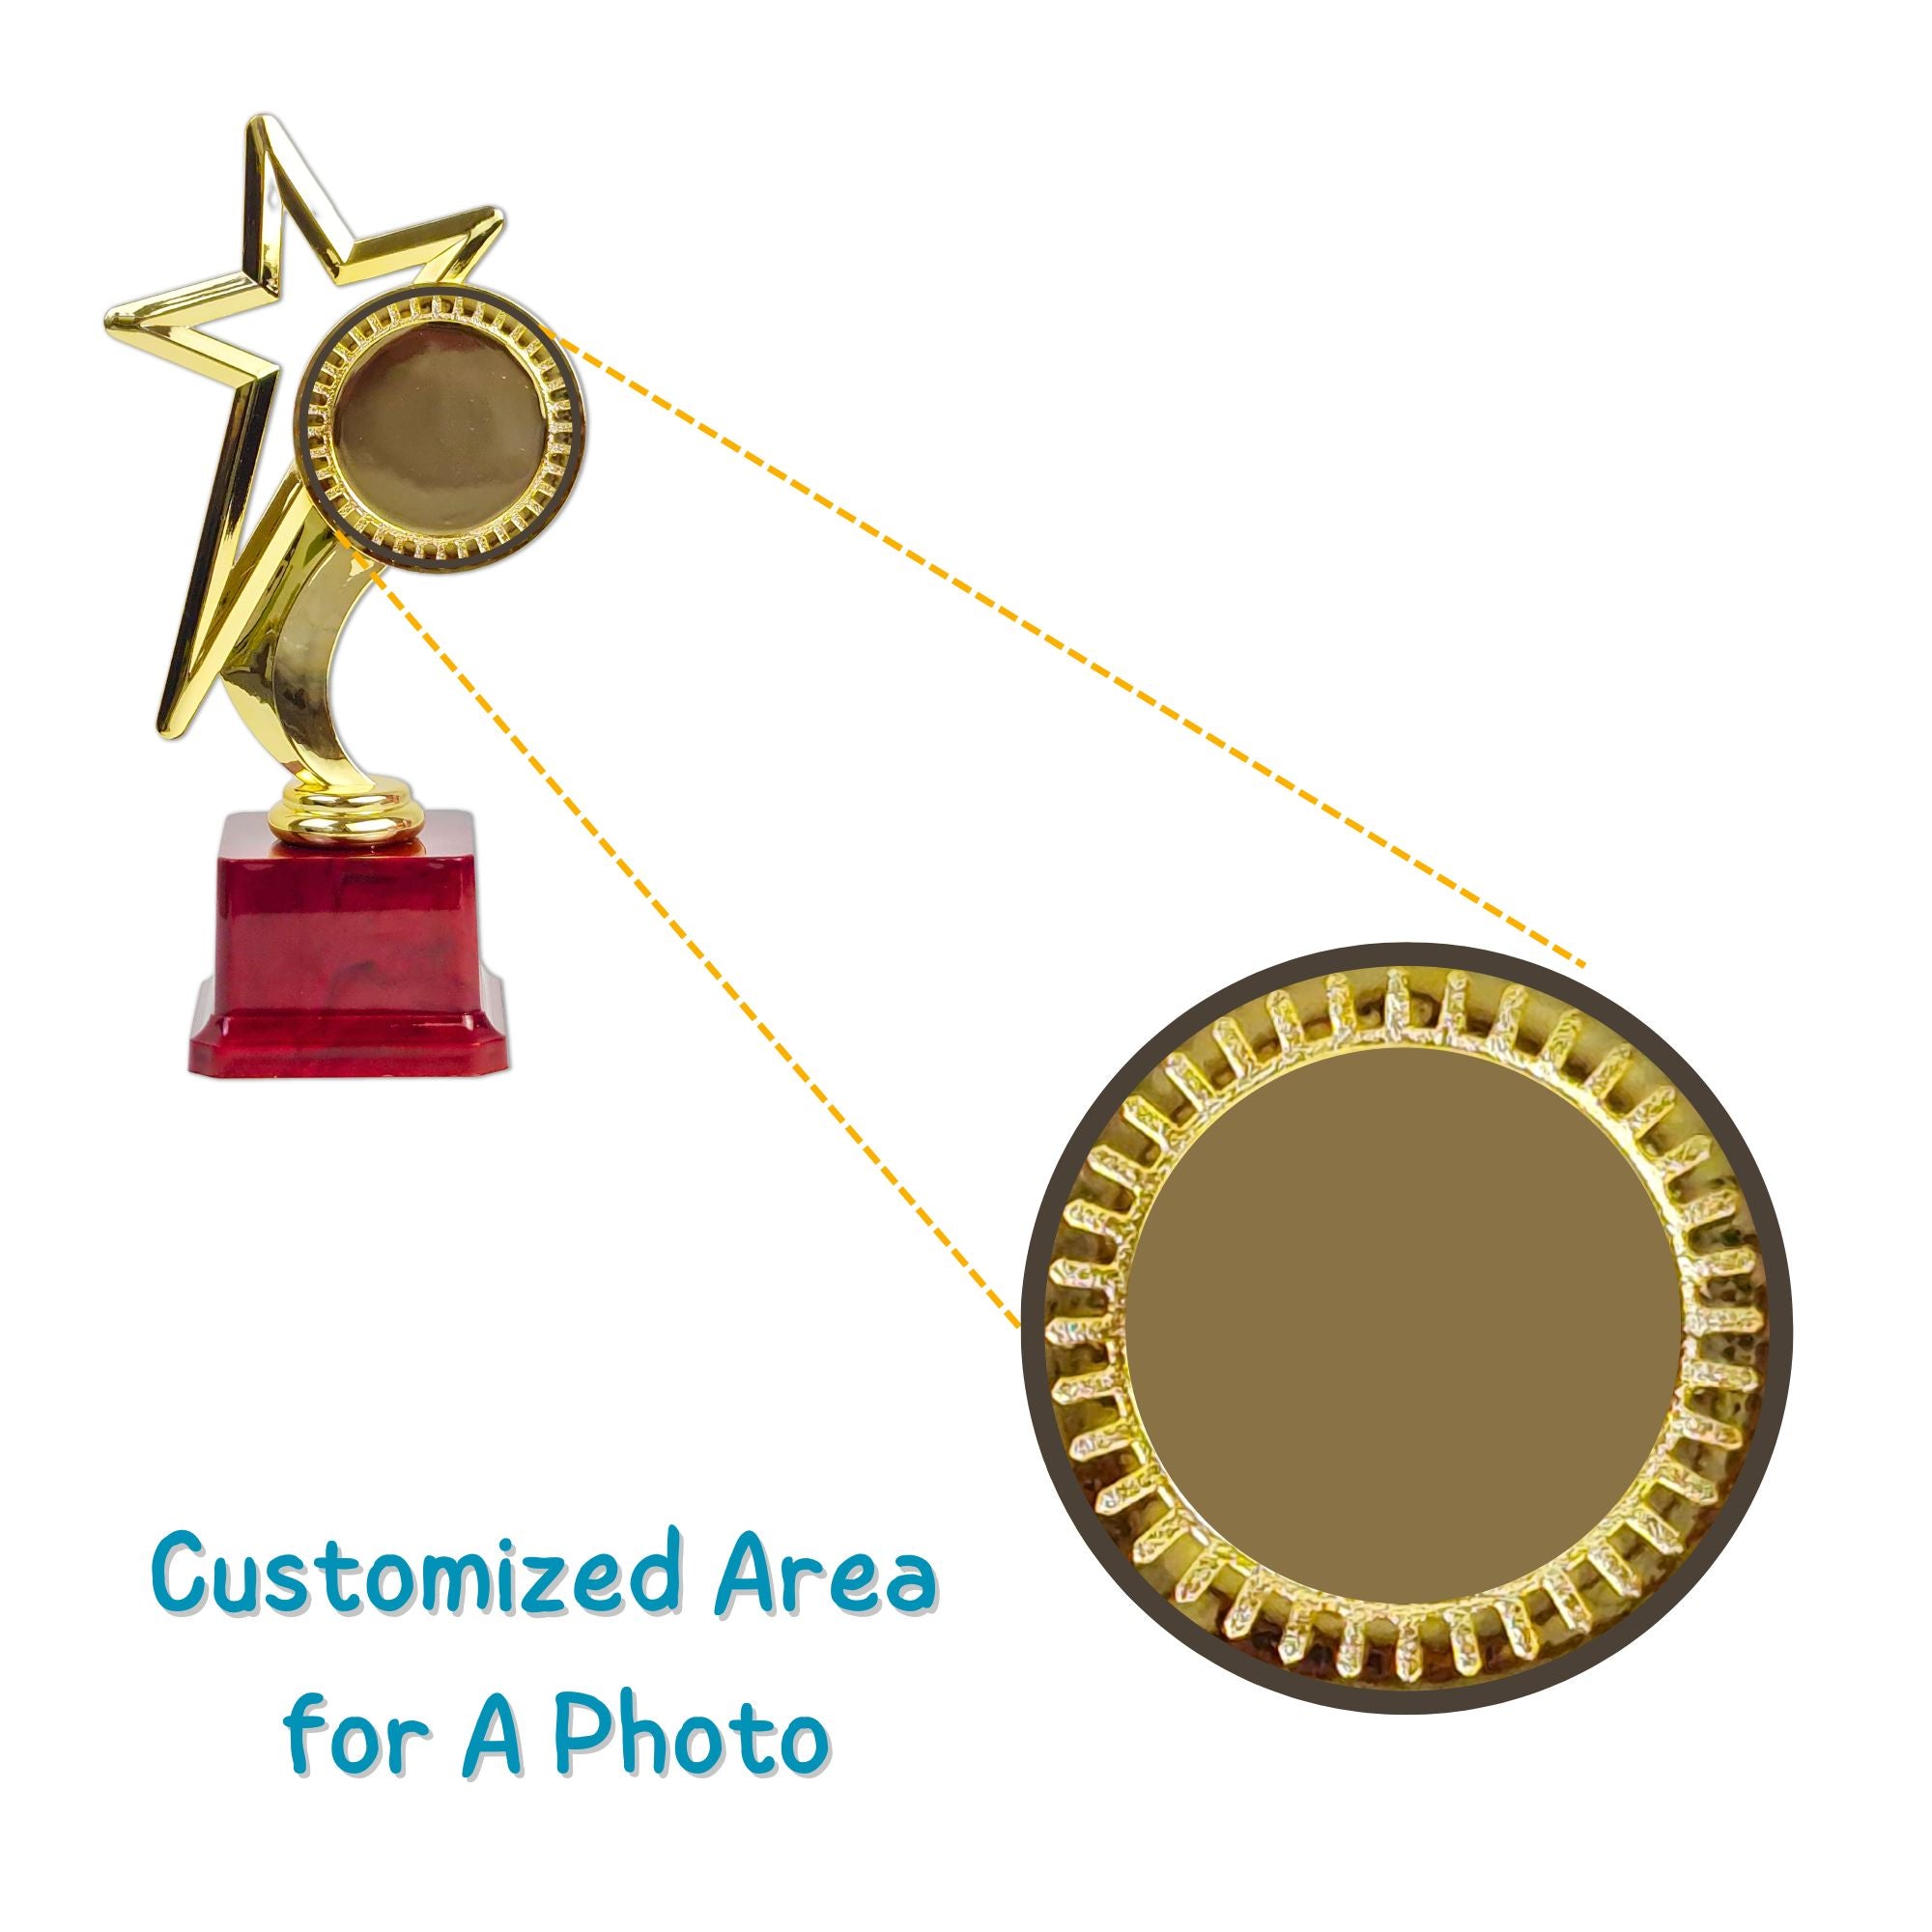 Golden Star Shaped Award Trophy with A Customized Place for A Photo for Kids